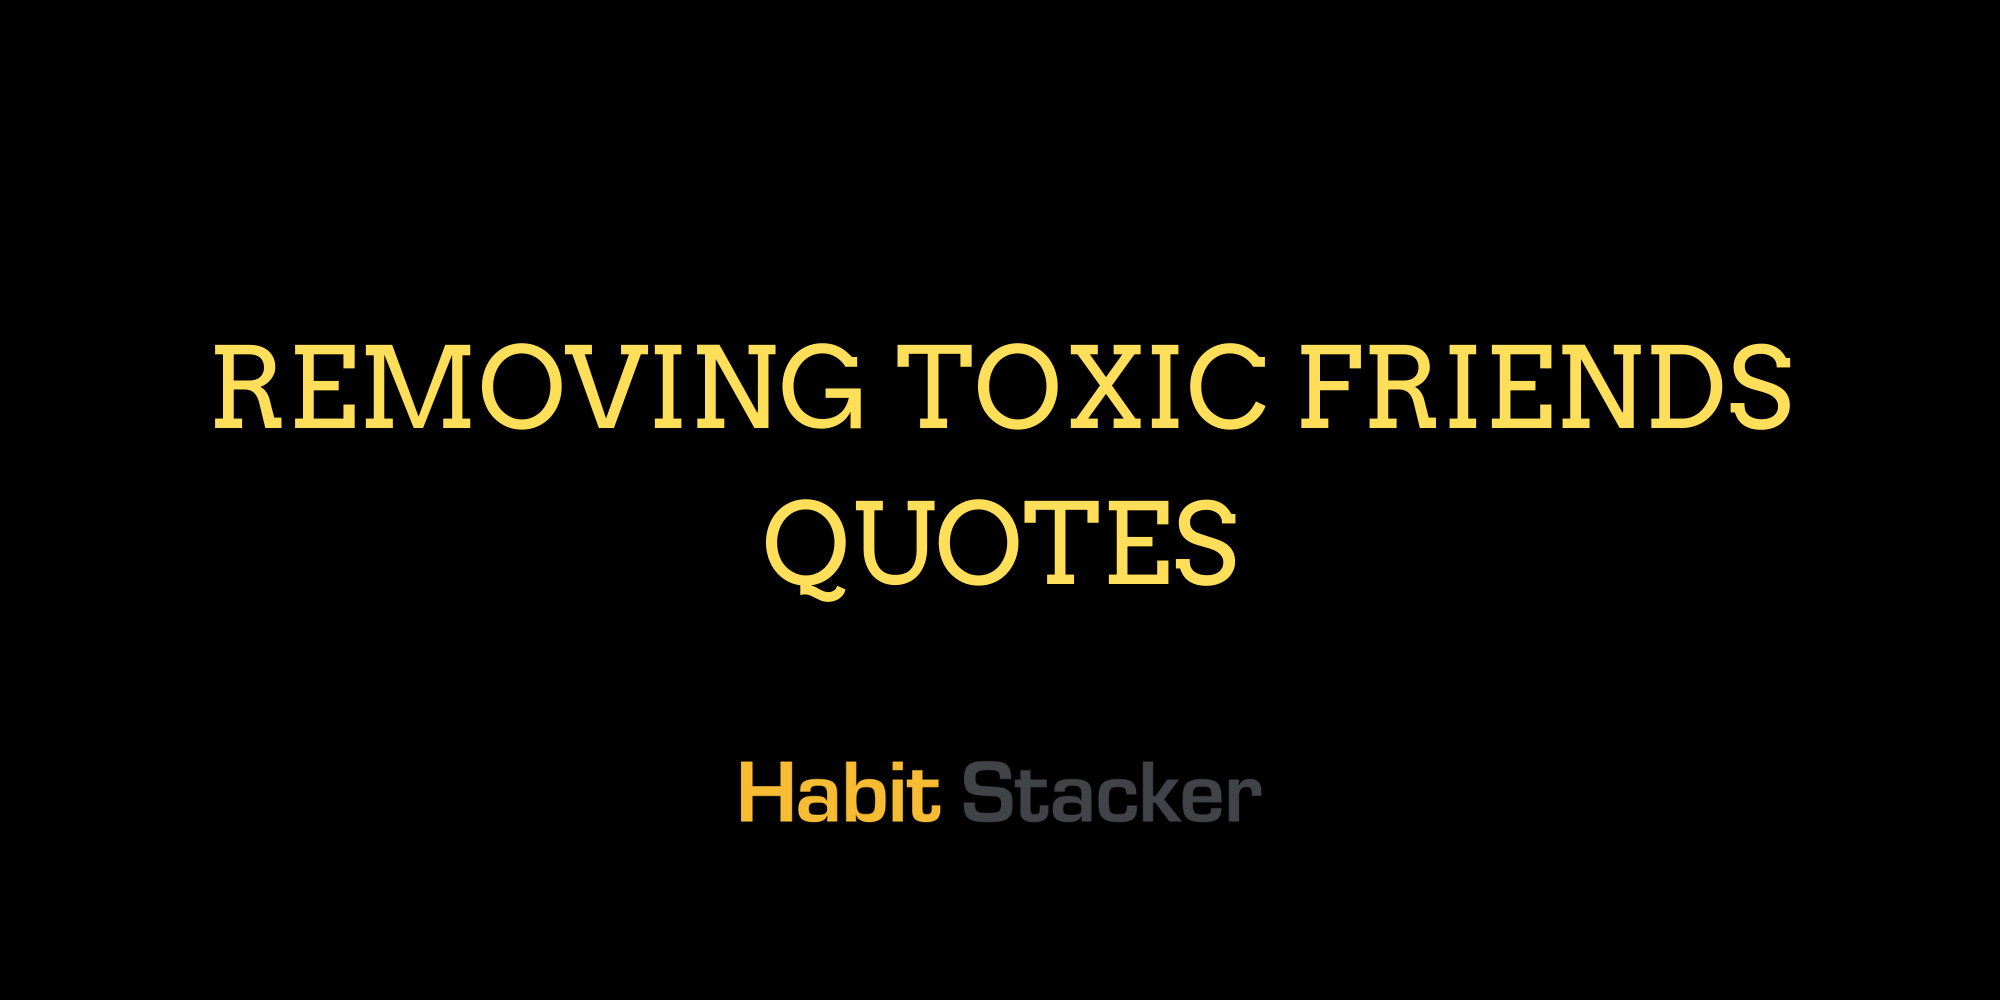 Here are 40 Removing Toxic Friends Quotes. 